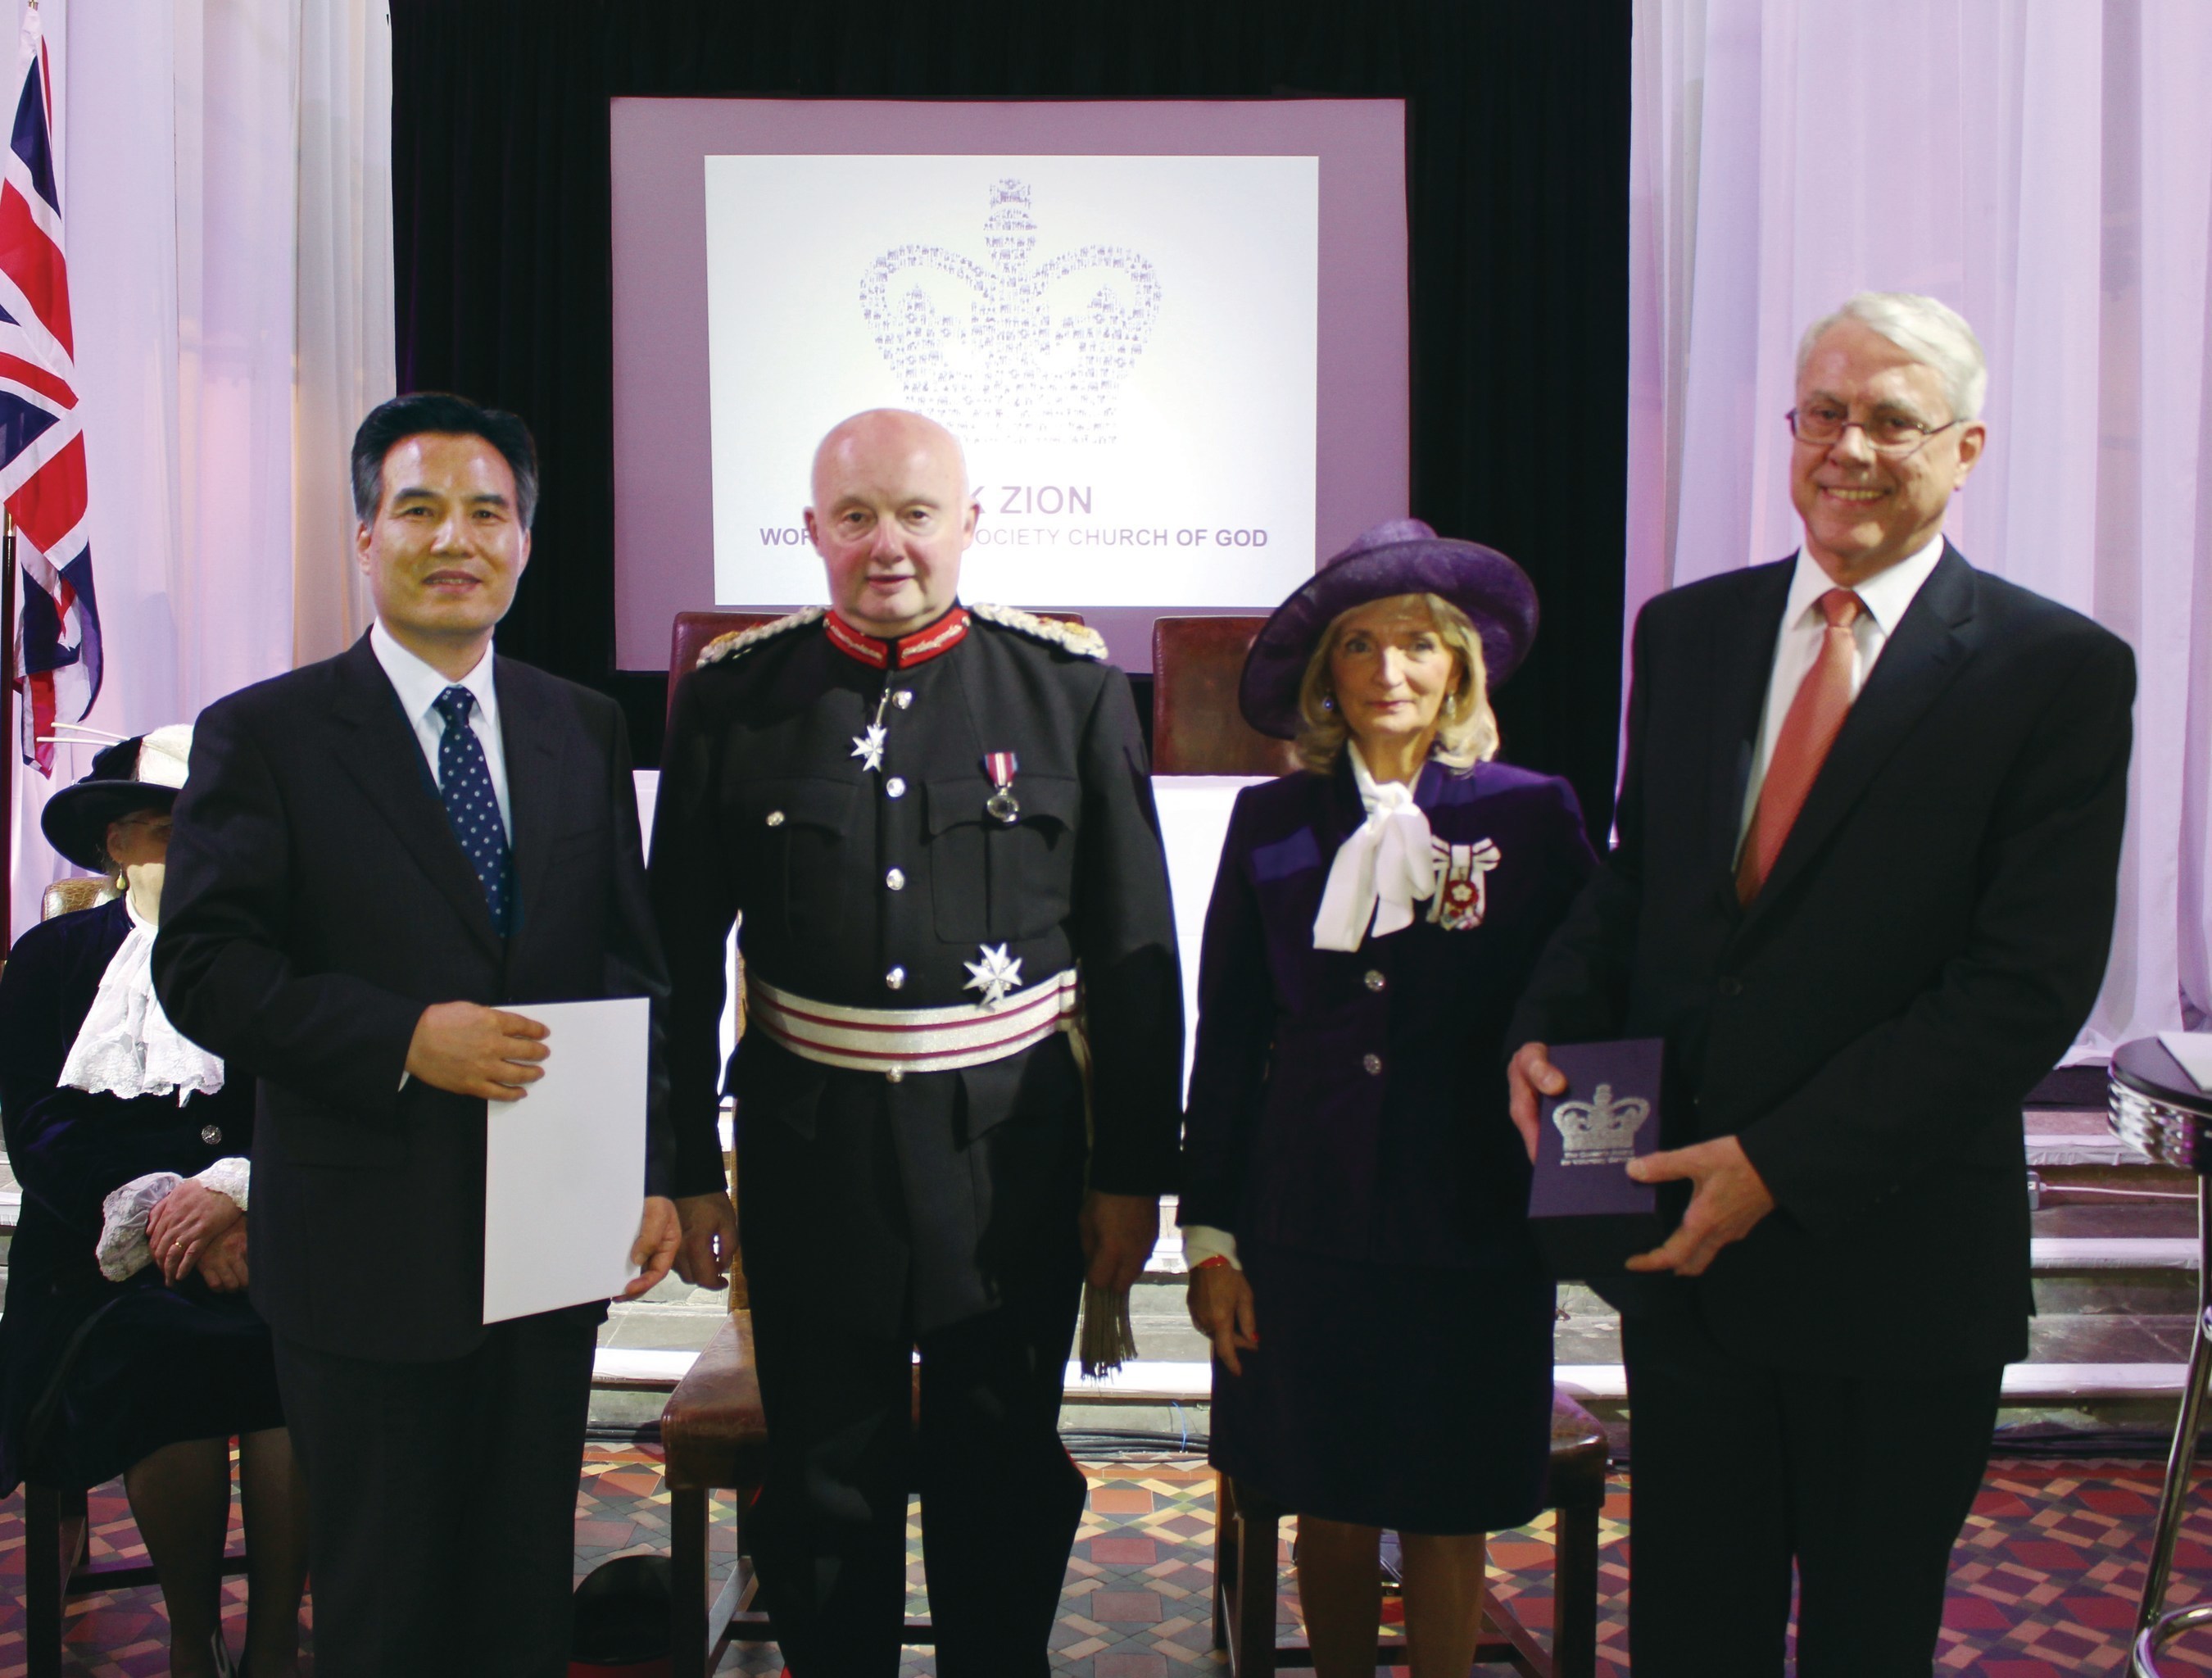 Pastor Kim Joo-Cheol receives the award certificate signed by Queen Elizabeth II and the commemorative crystal of the Queen's Award.